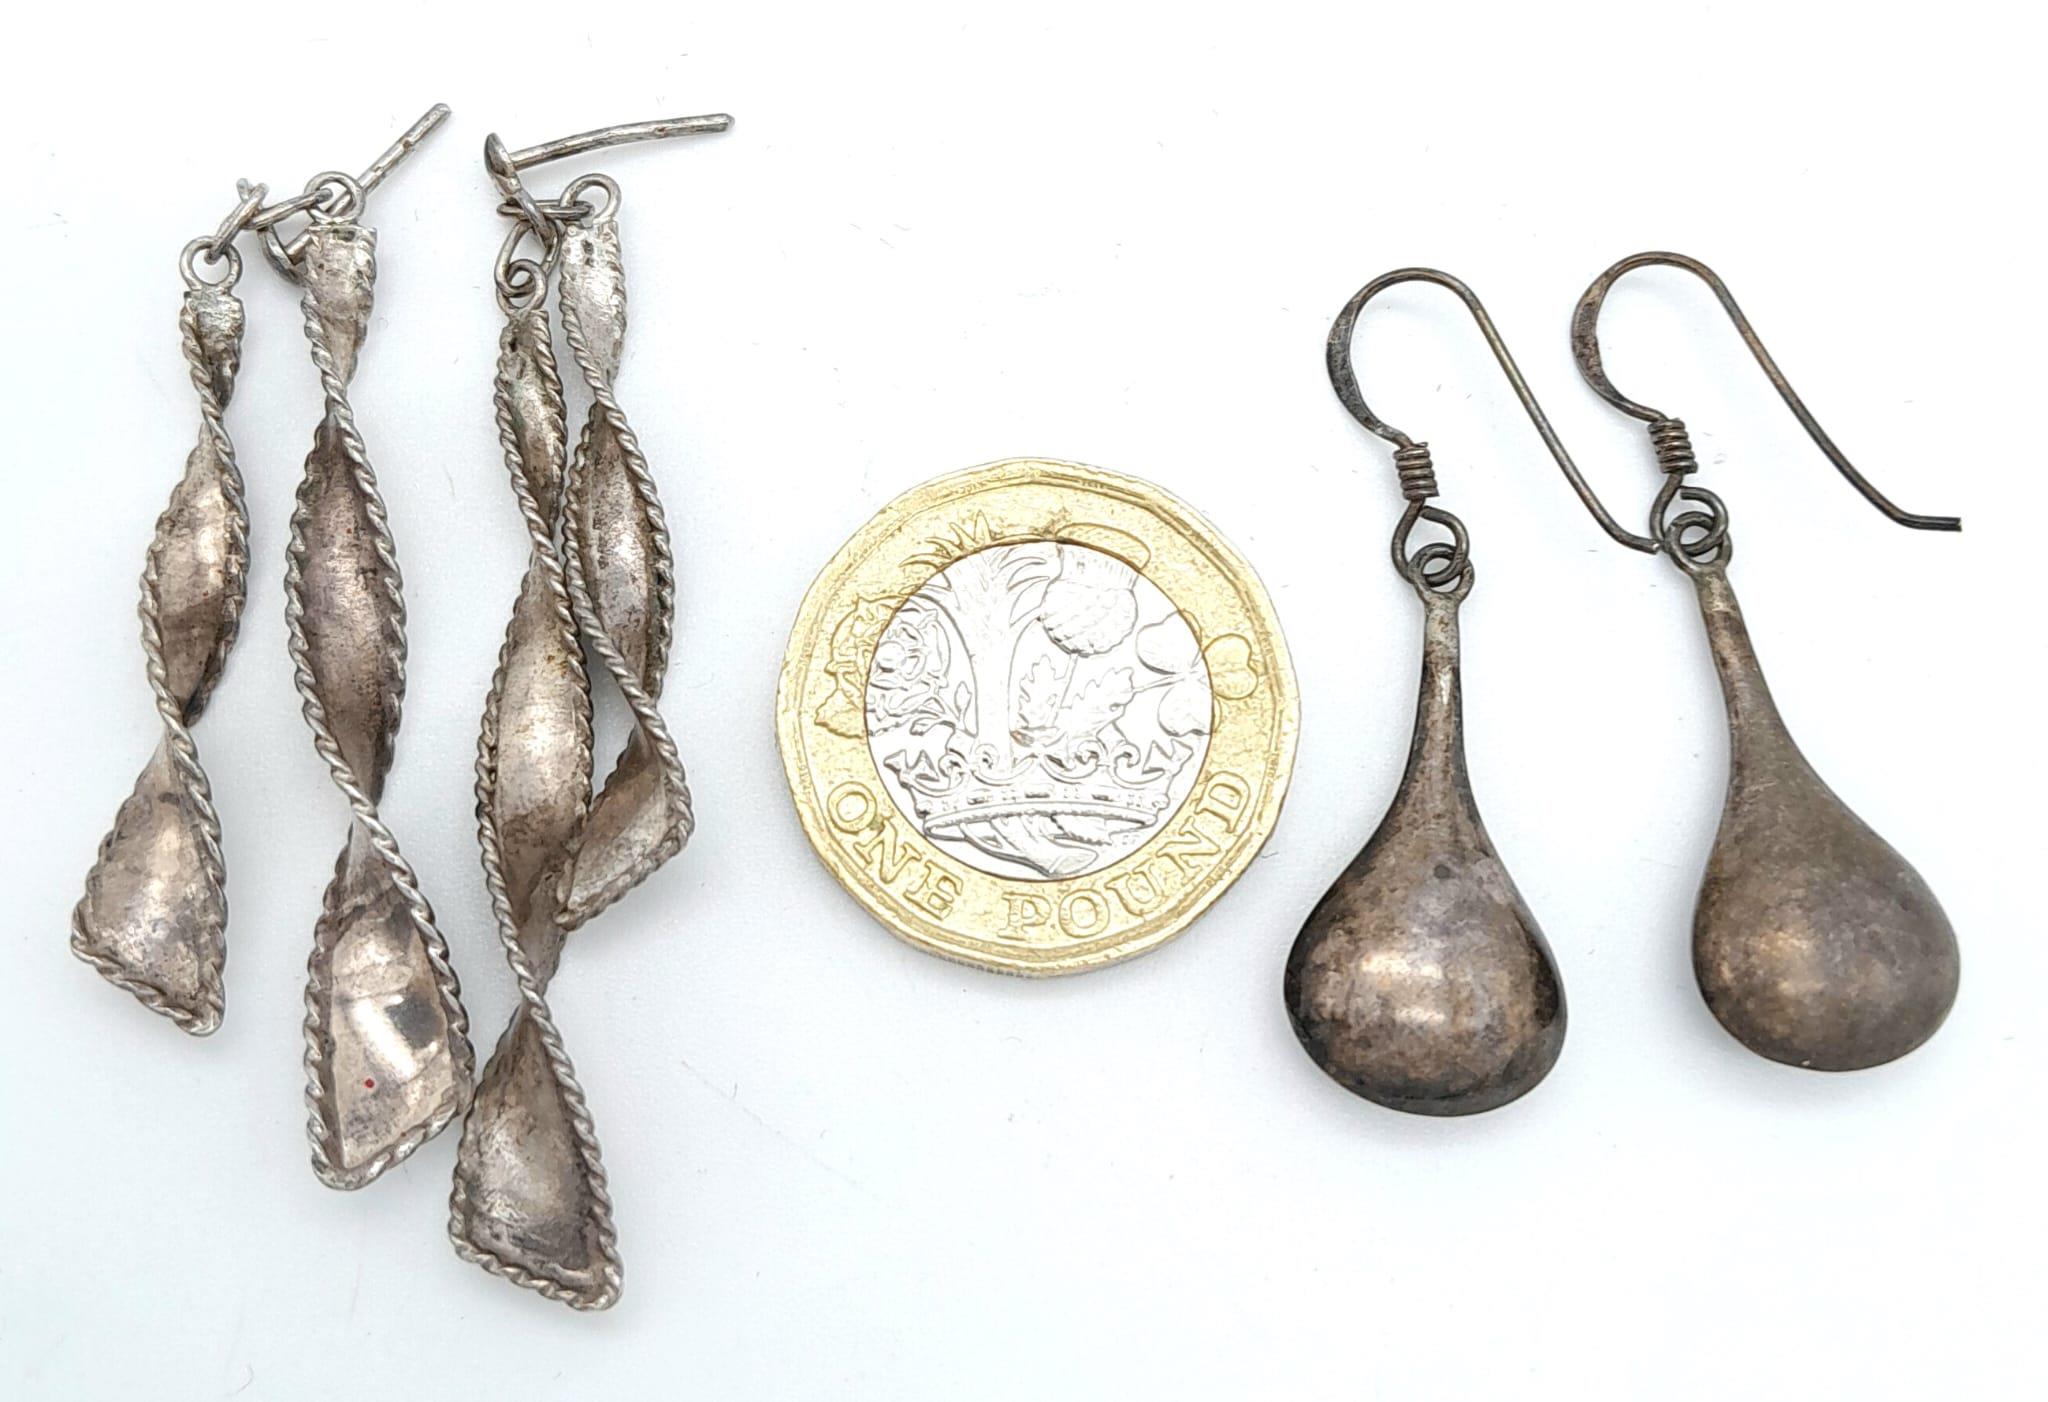 2X stylist pairs of vintage silver earrings. Total weight 6.6G. Please see photos for details. - Image 3 of 7